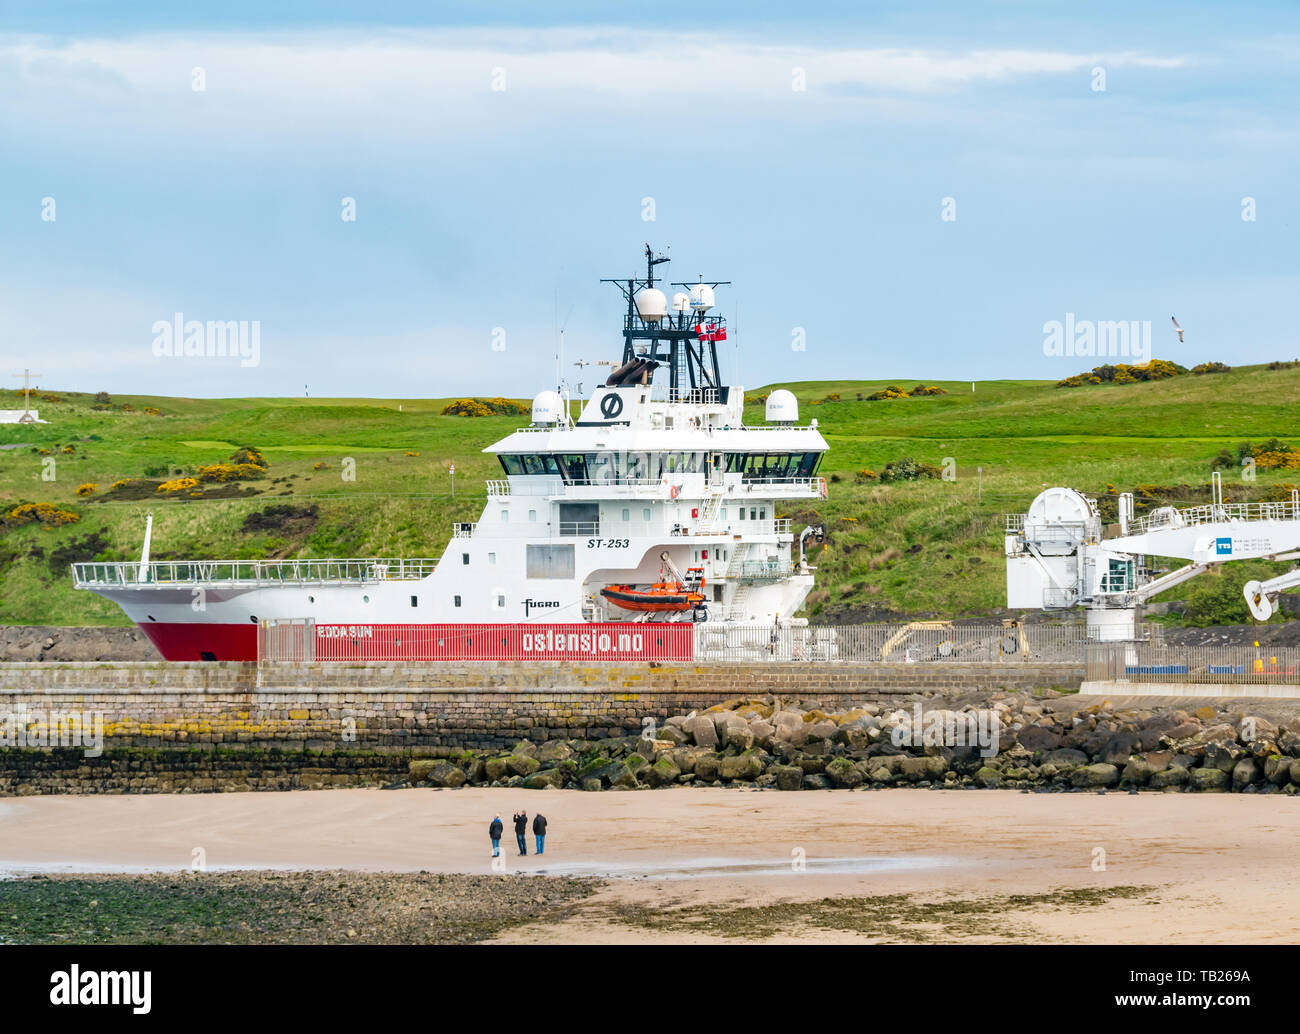 Aberdeen, Scotland, United Kingdom, 29th May 2019.  A Ostensjo Rederi Norwegian research/survey vessel, Edda Sun, leaves the harbour and sets sail for the North Sea as people enjoy an evening walk on the beach near Footdee and the old fisherman cottages Stock Photo